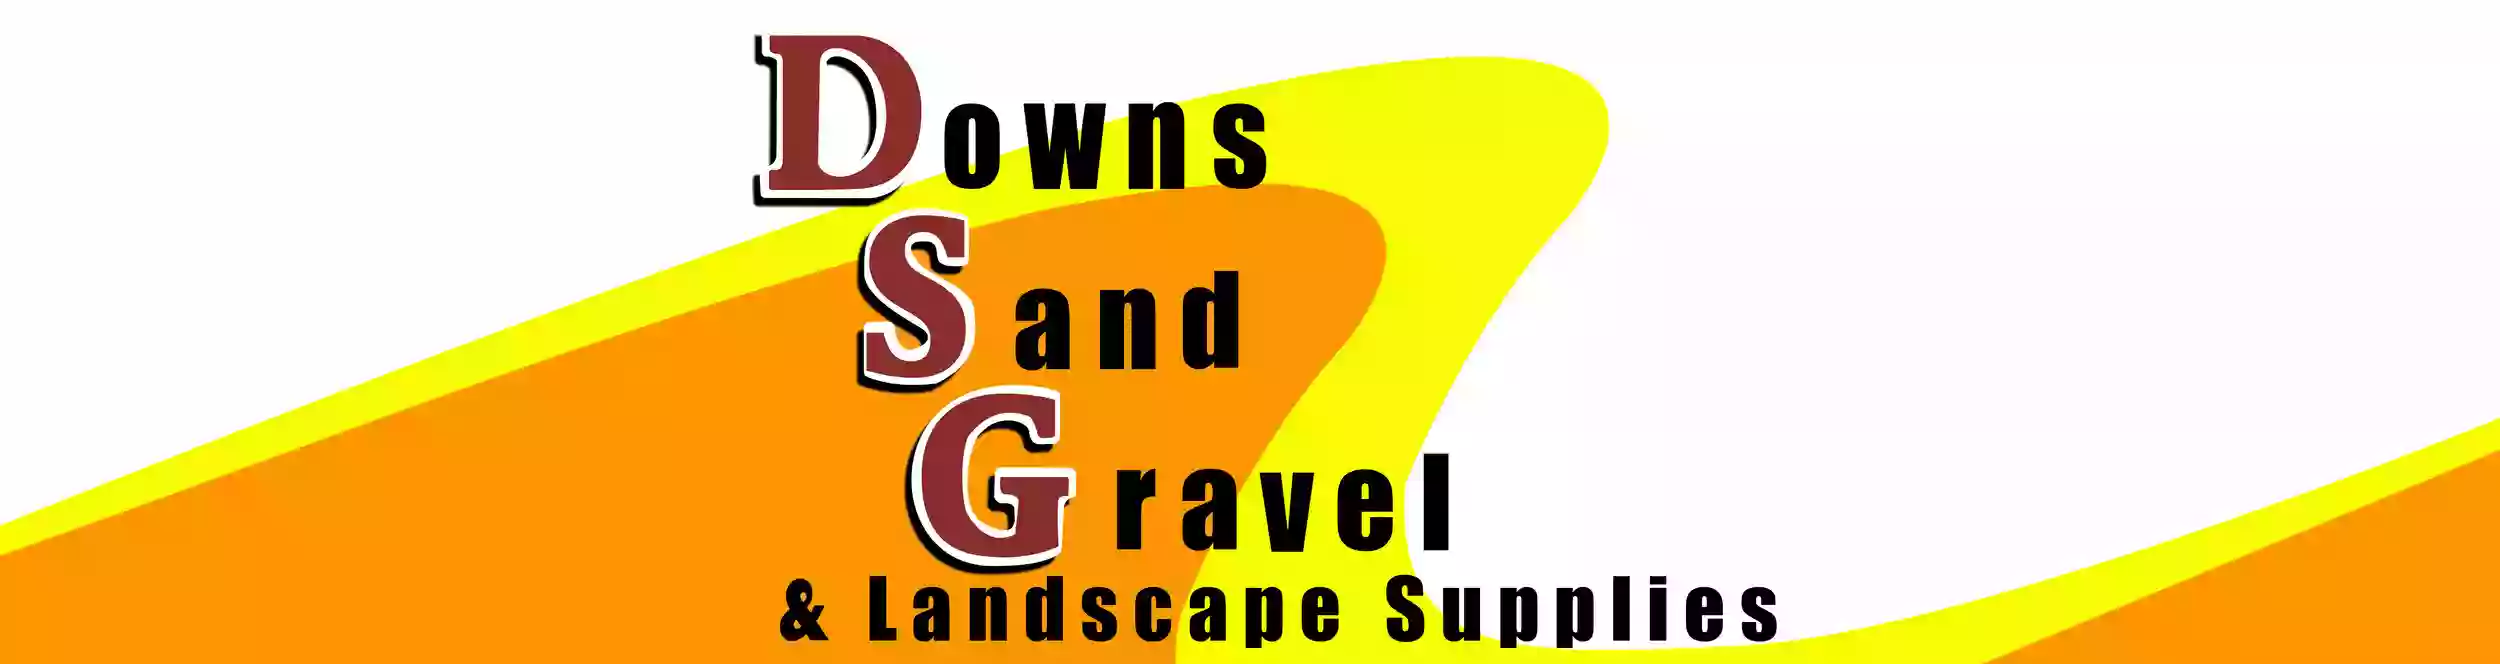 Downs Sand Gravel & Landscaping supplies